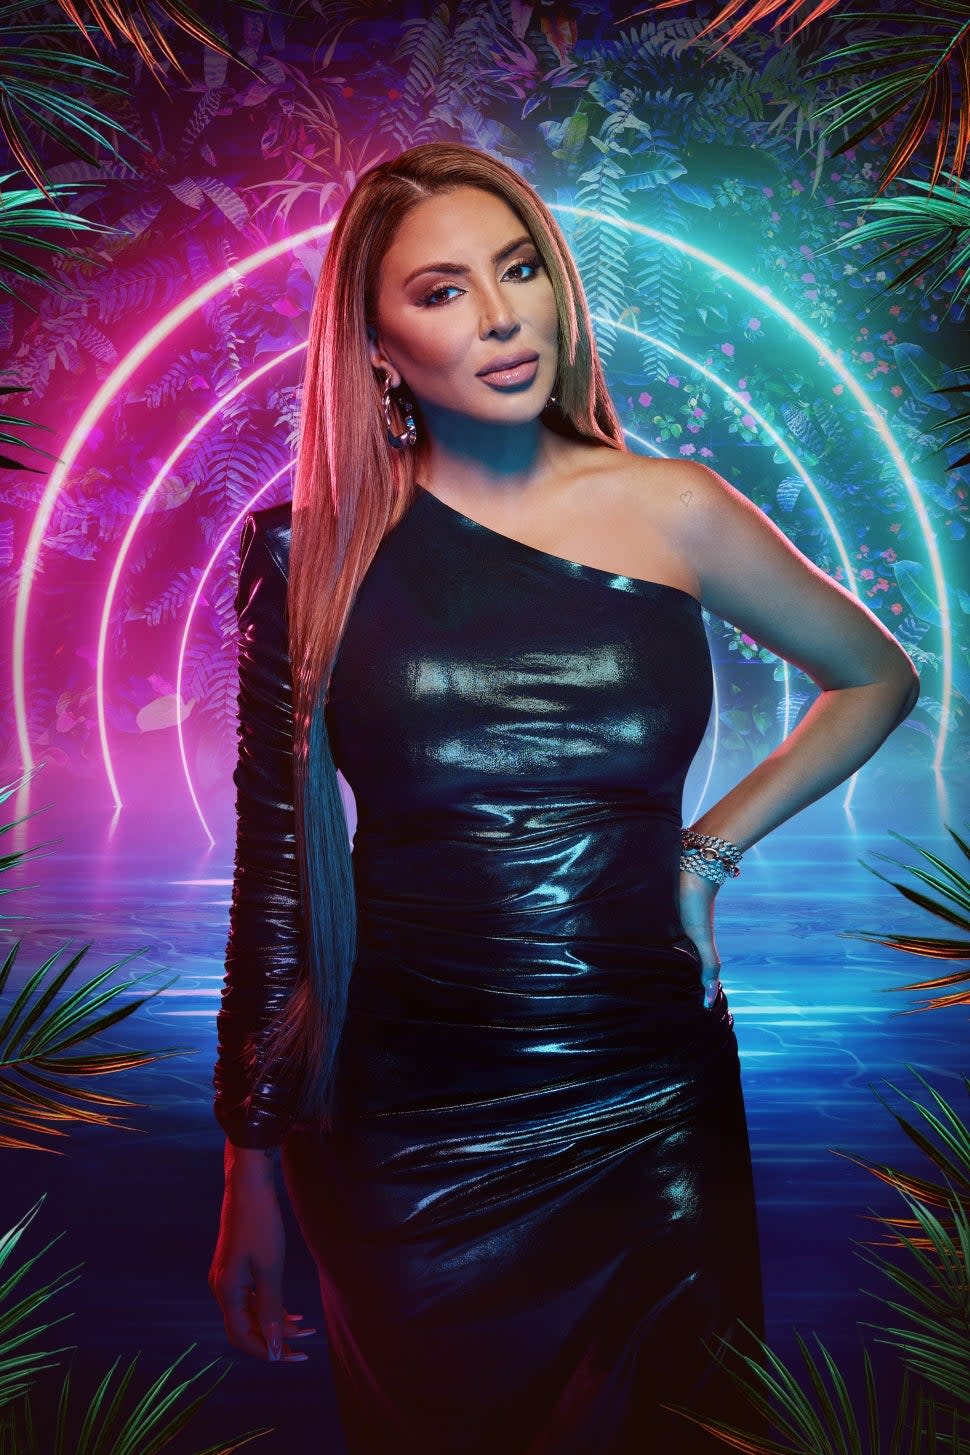 Larsa Pippen's The Real Housewives of Miami headshot for season 4